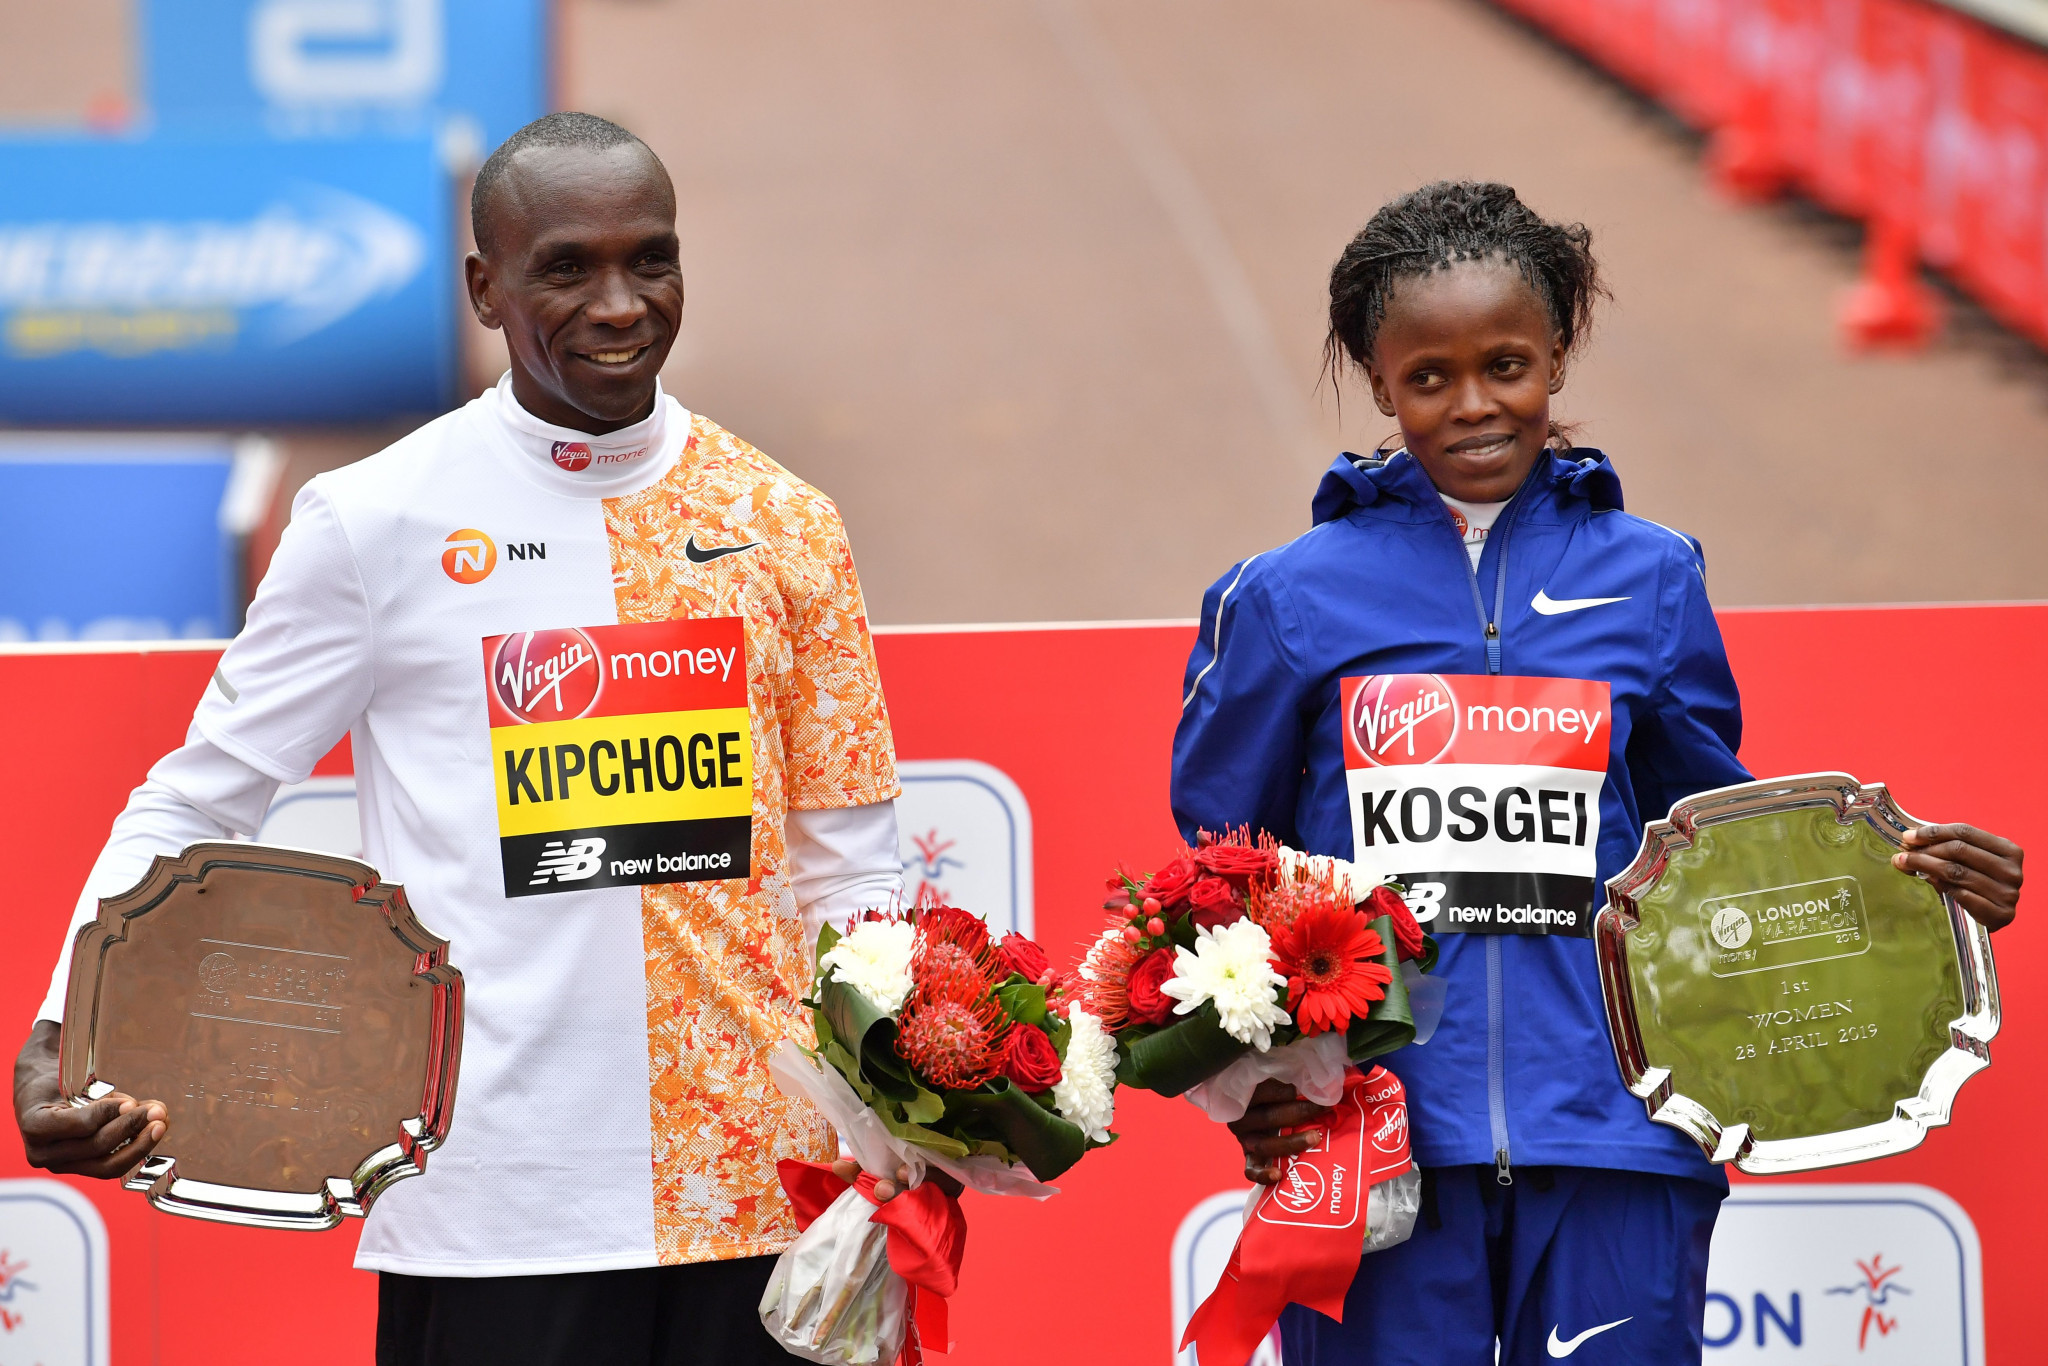 Eliud Kipchoge and Brigid Kosgei delivered a Kenyan double at the London Marathon ©Getty Images